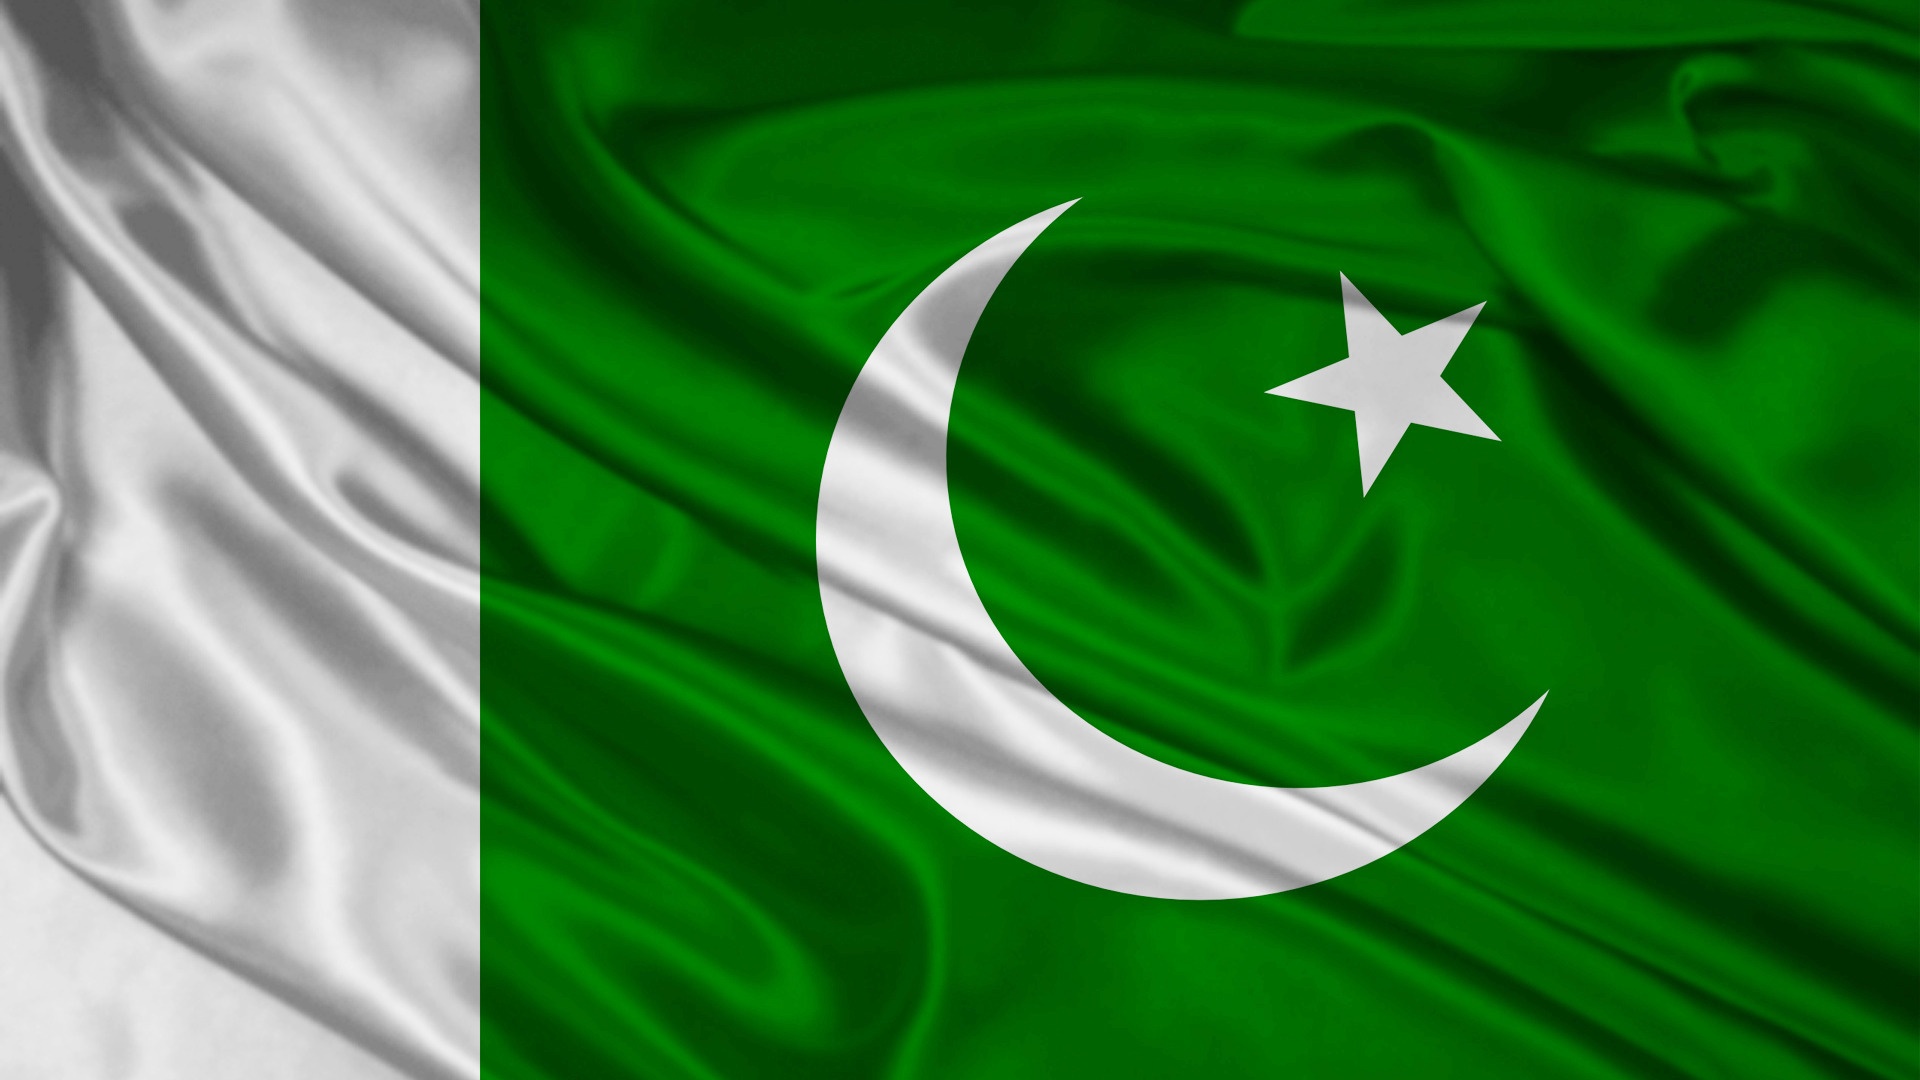 Pakistan Independence Day 2019 - HD Wallpaper 